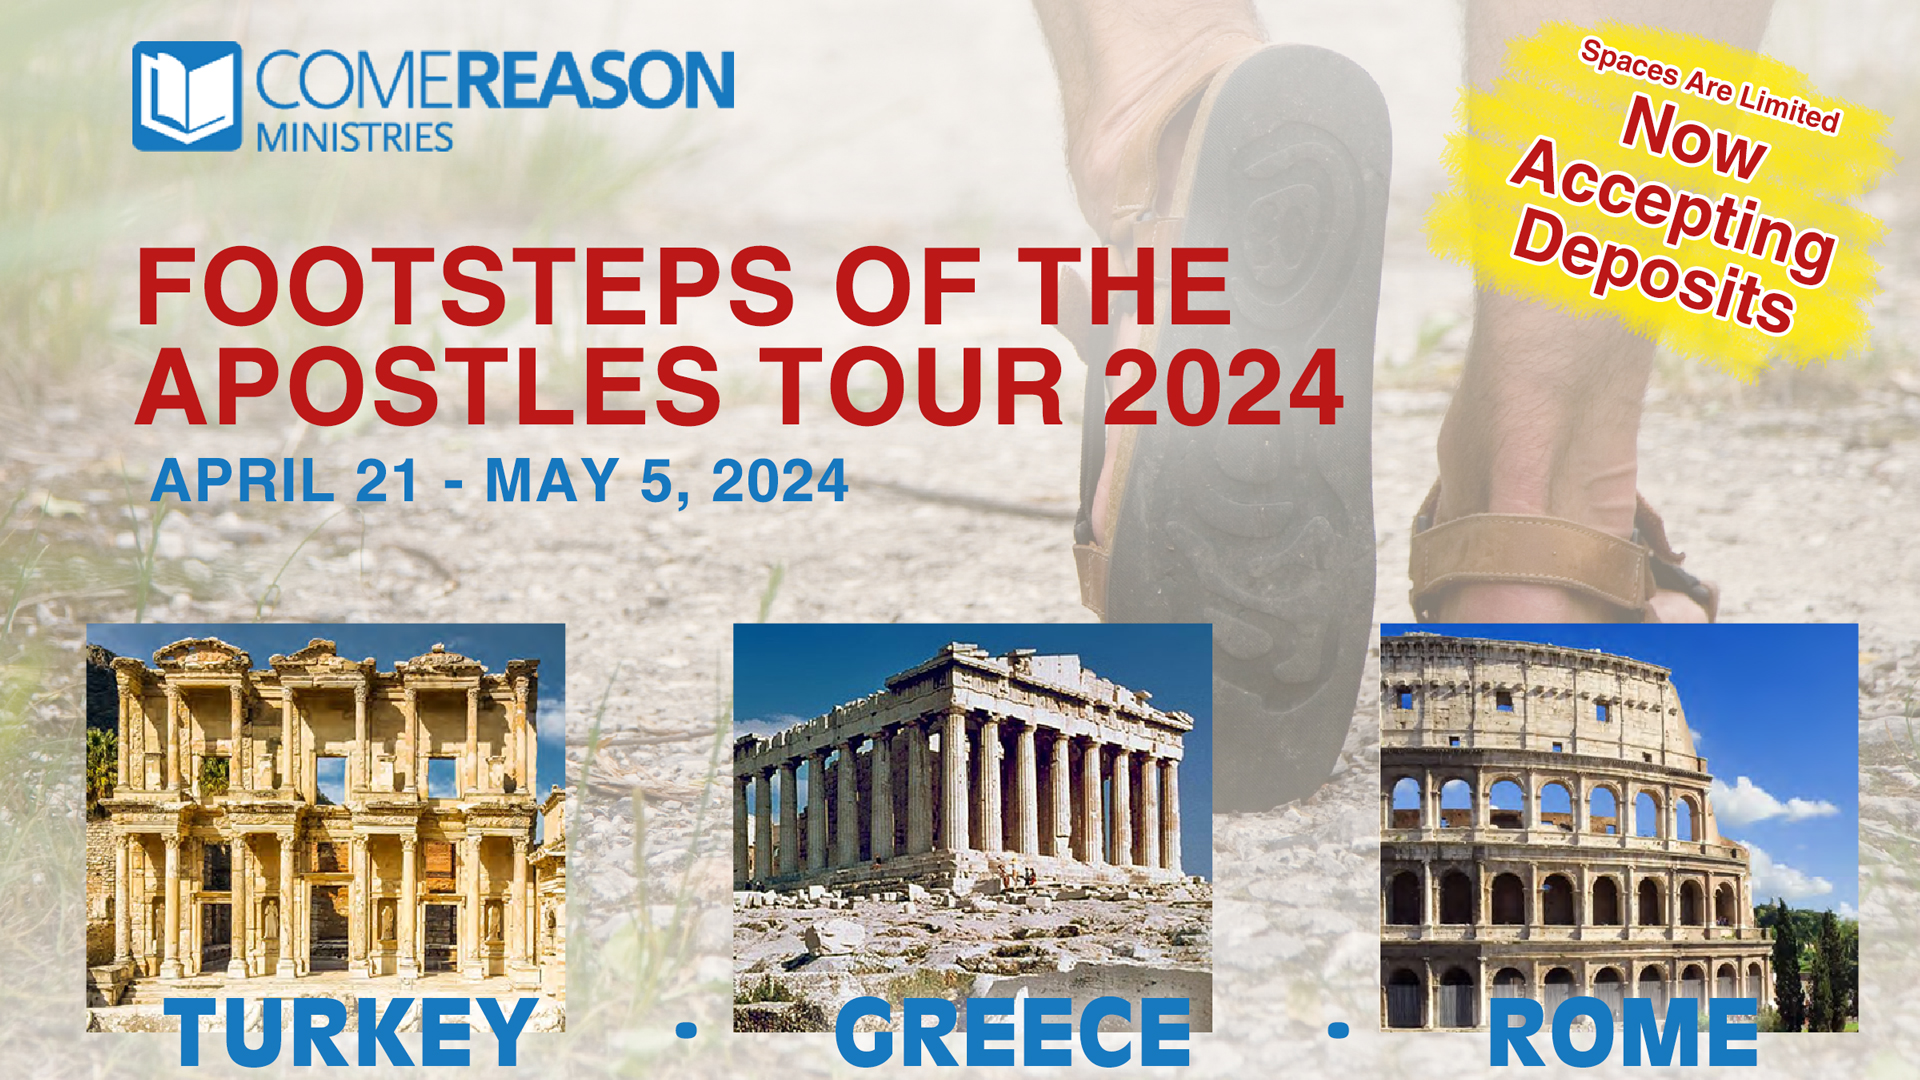 Footsteps of the Apostles Tour